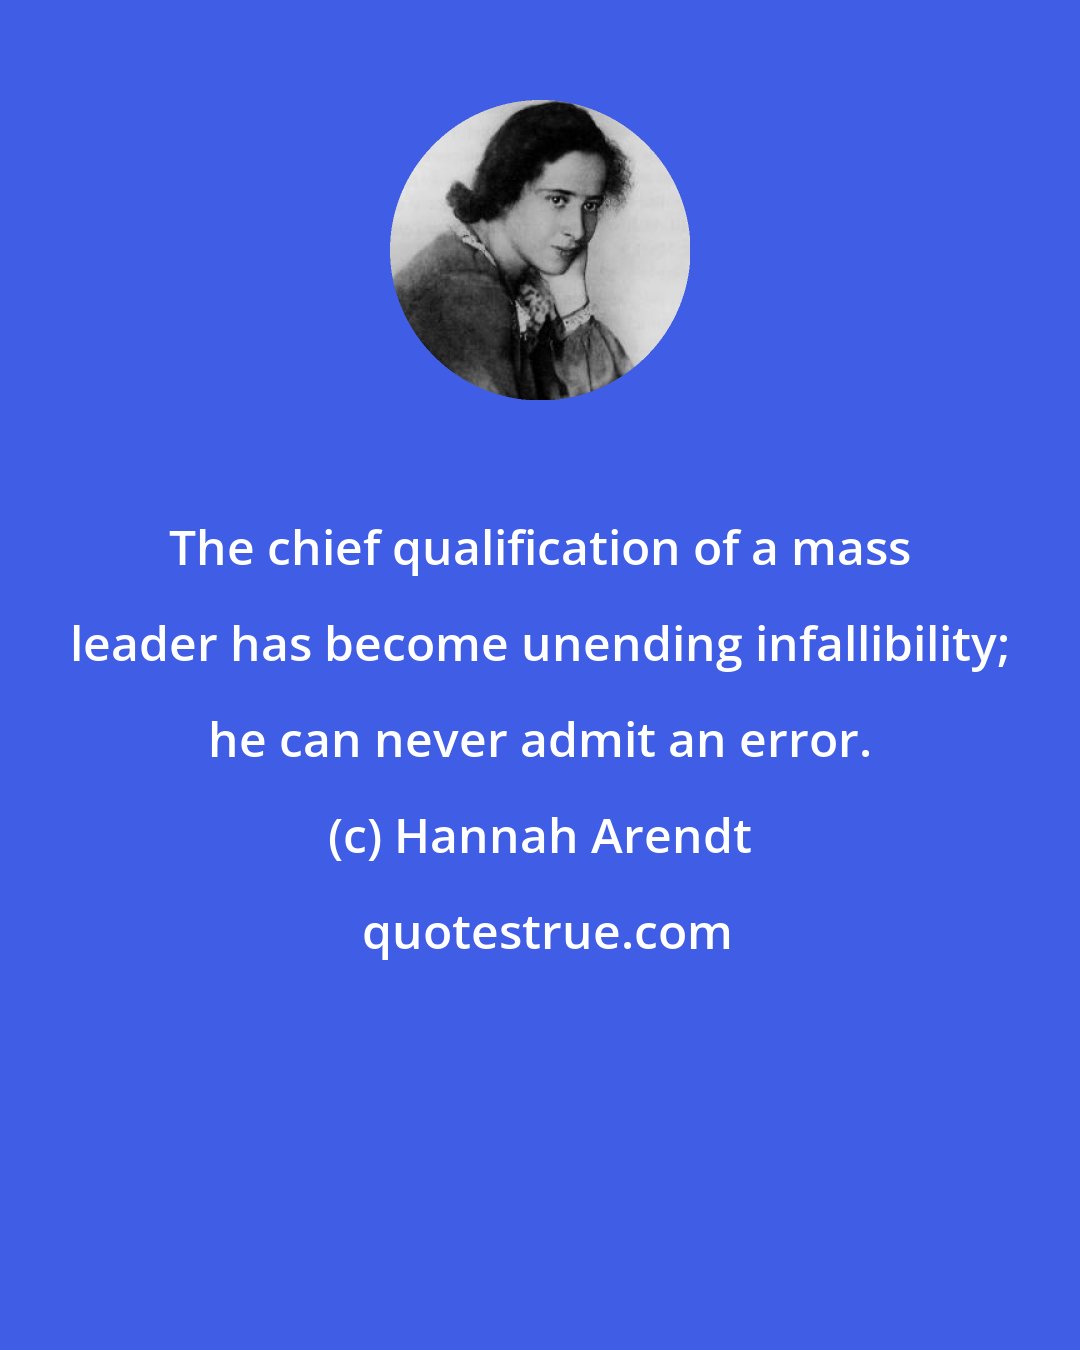 Hannah Arendt: The chief qualification of a mass leader has become unending infallibility; he can never admit an error.